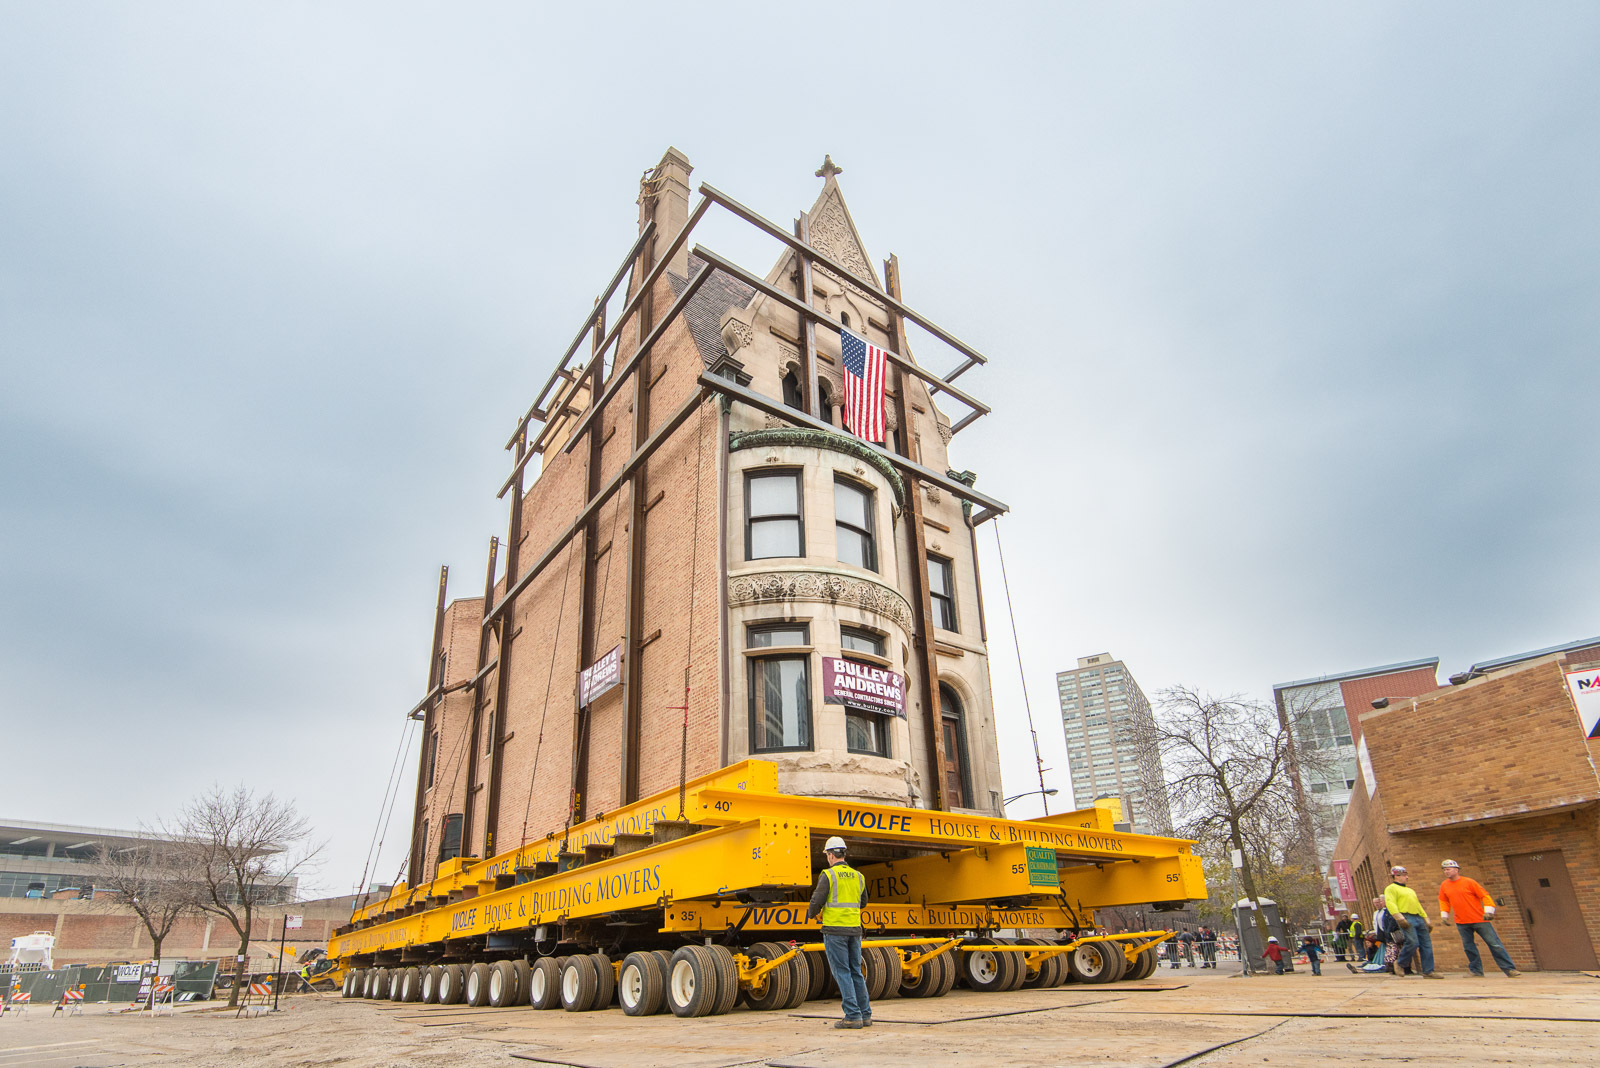 Historic Rees House move in Chicago, IL